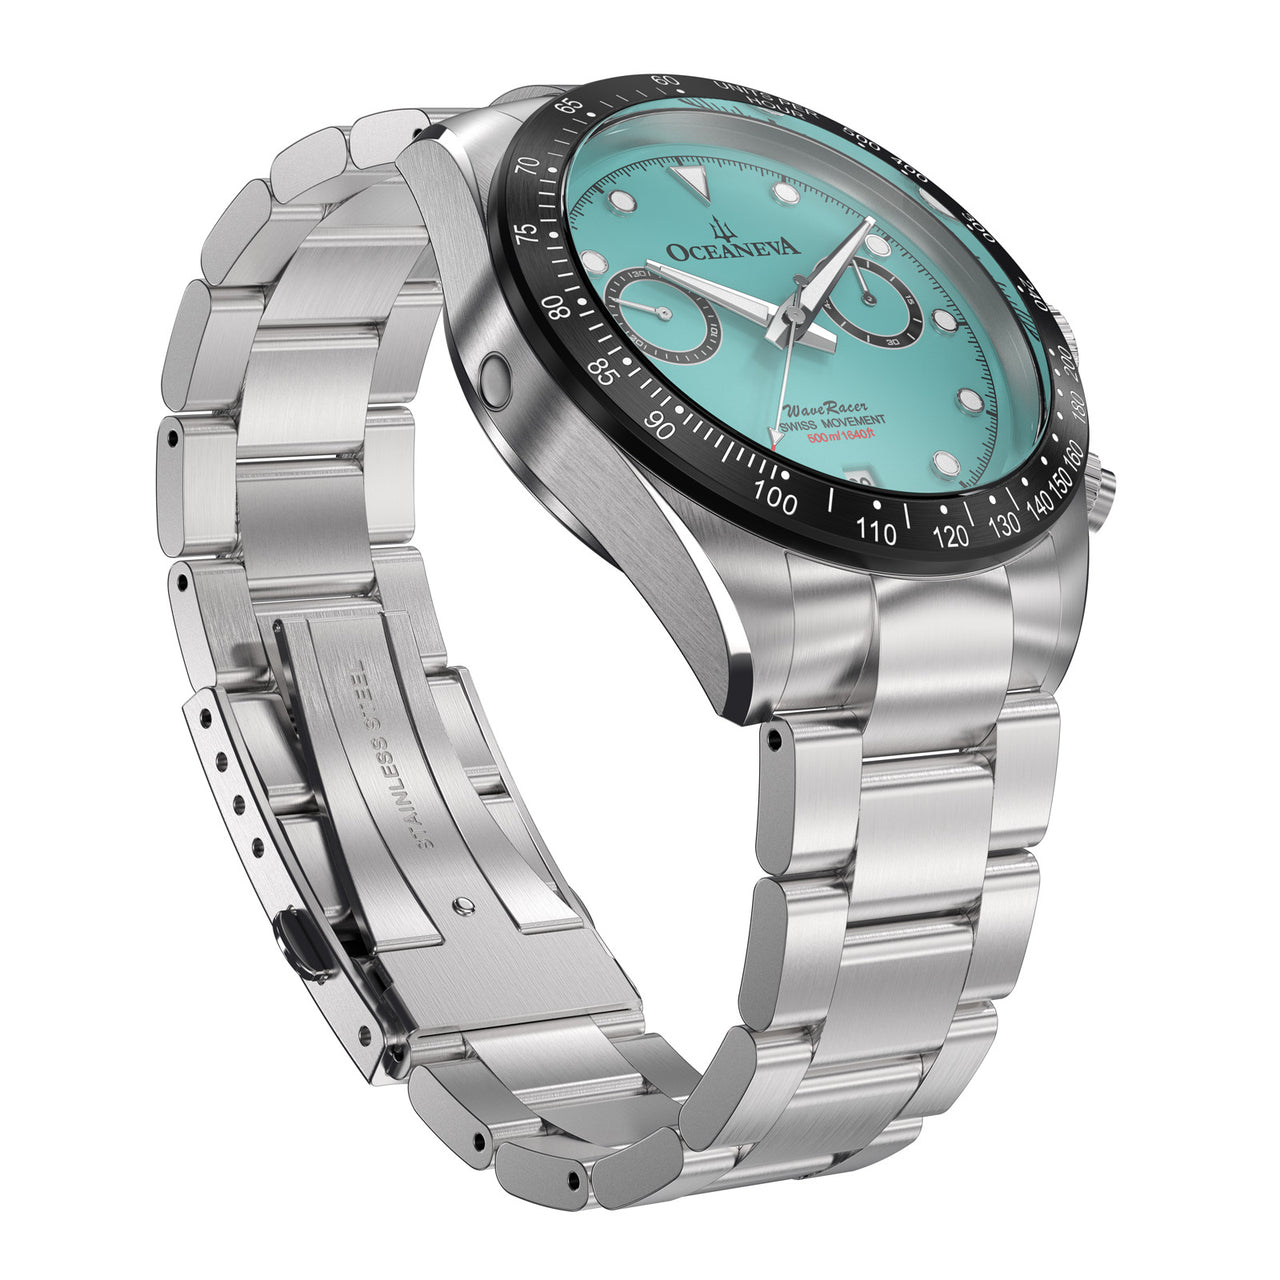 Oceaneva Mint Dial Chronograph Watch Front Picture Slight Right Slant View